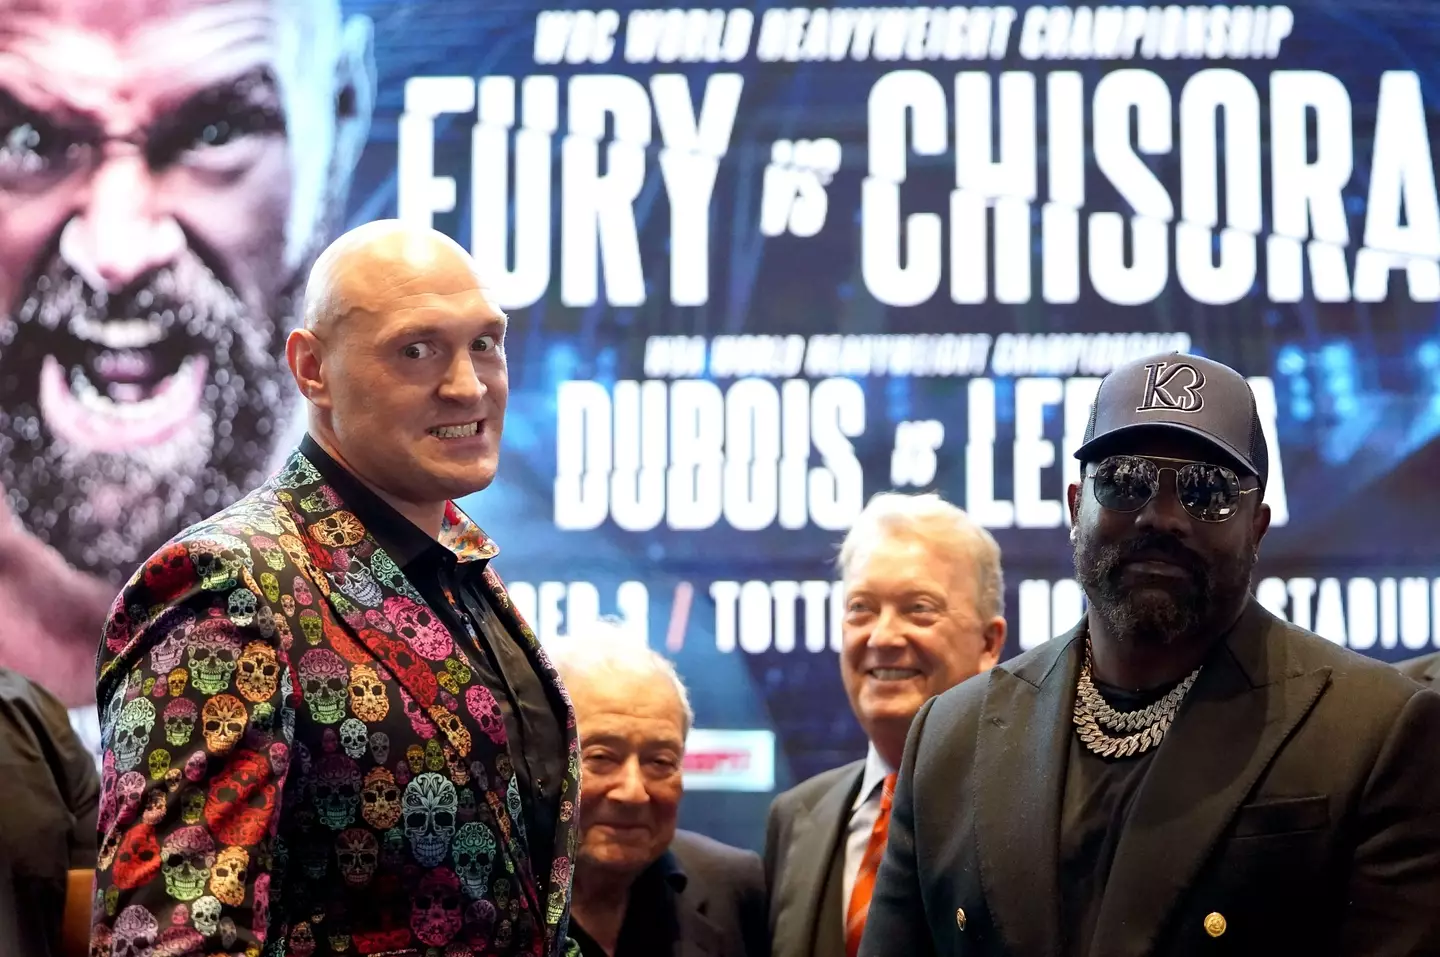 Fury and Chisora during a press conference earlier this month. (Image